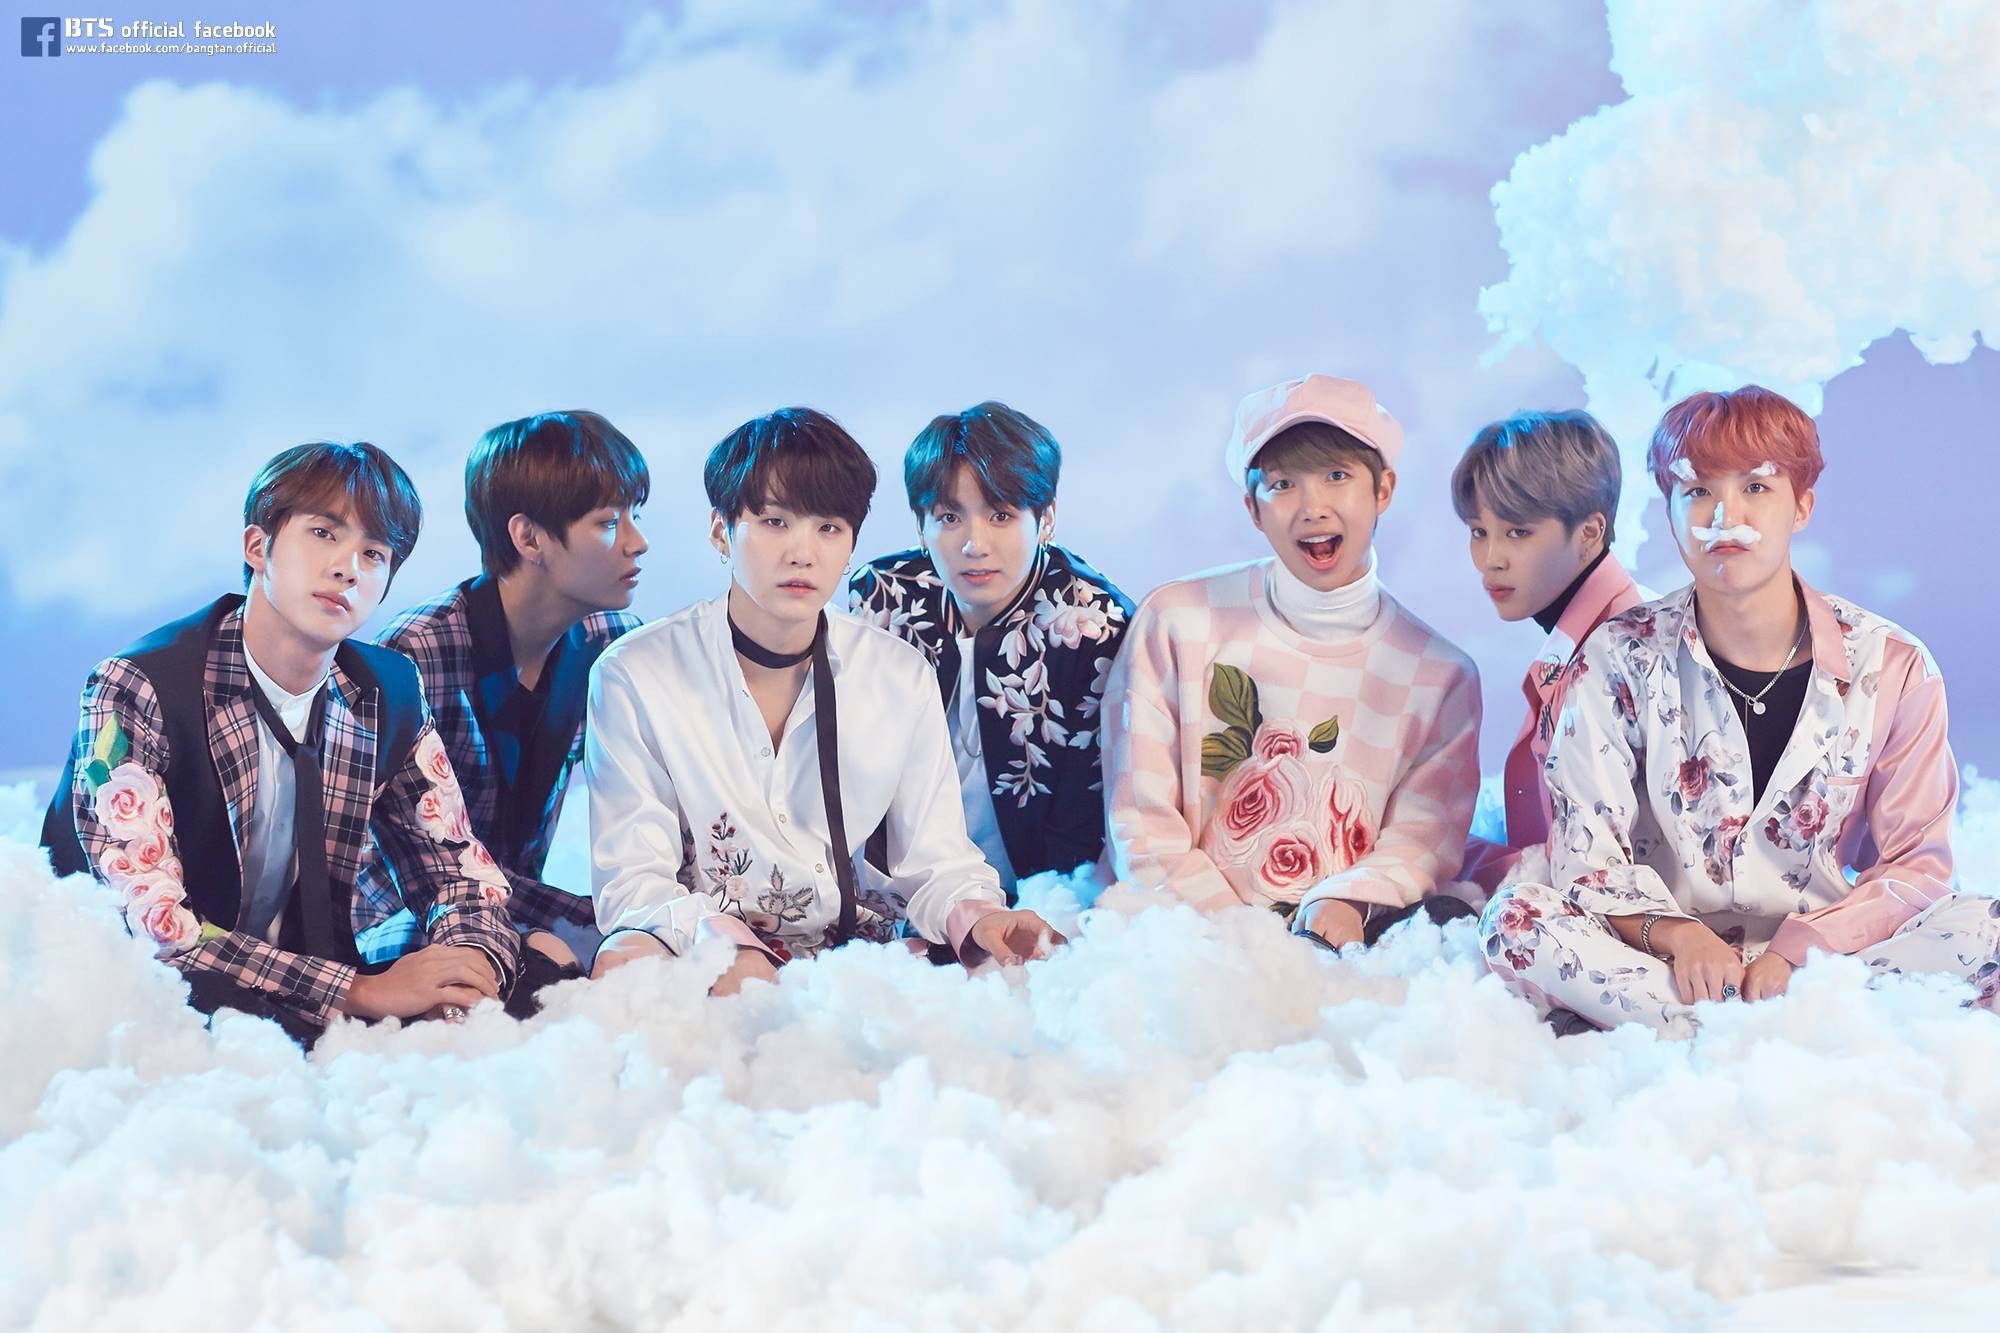 Good Wings Bts. THEY ARE SO CUTE